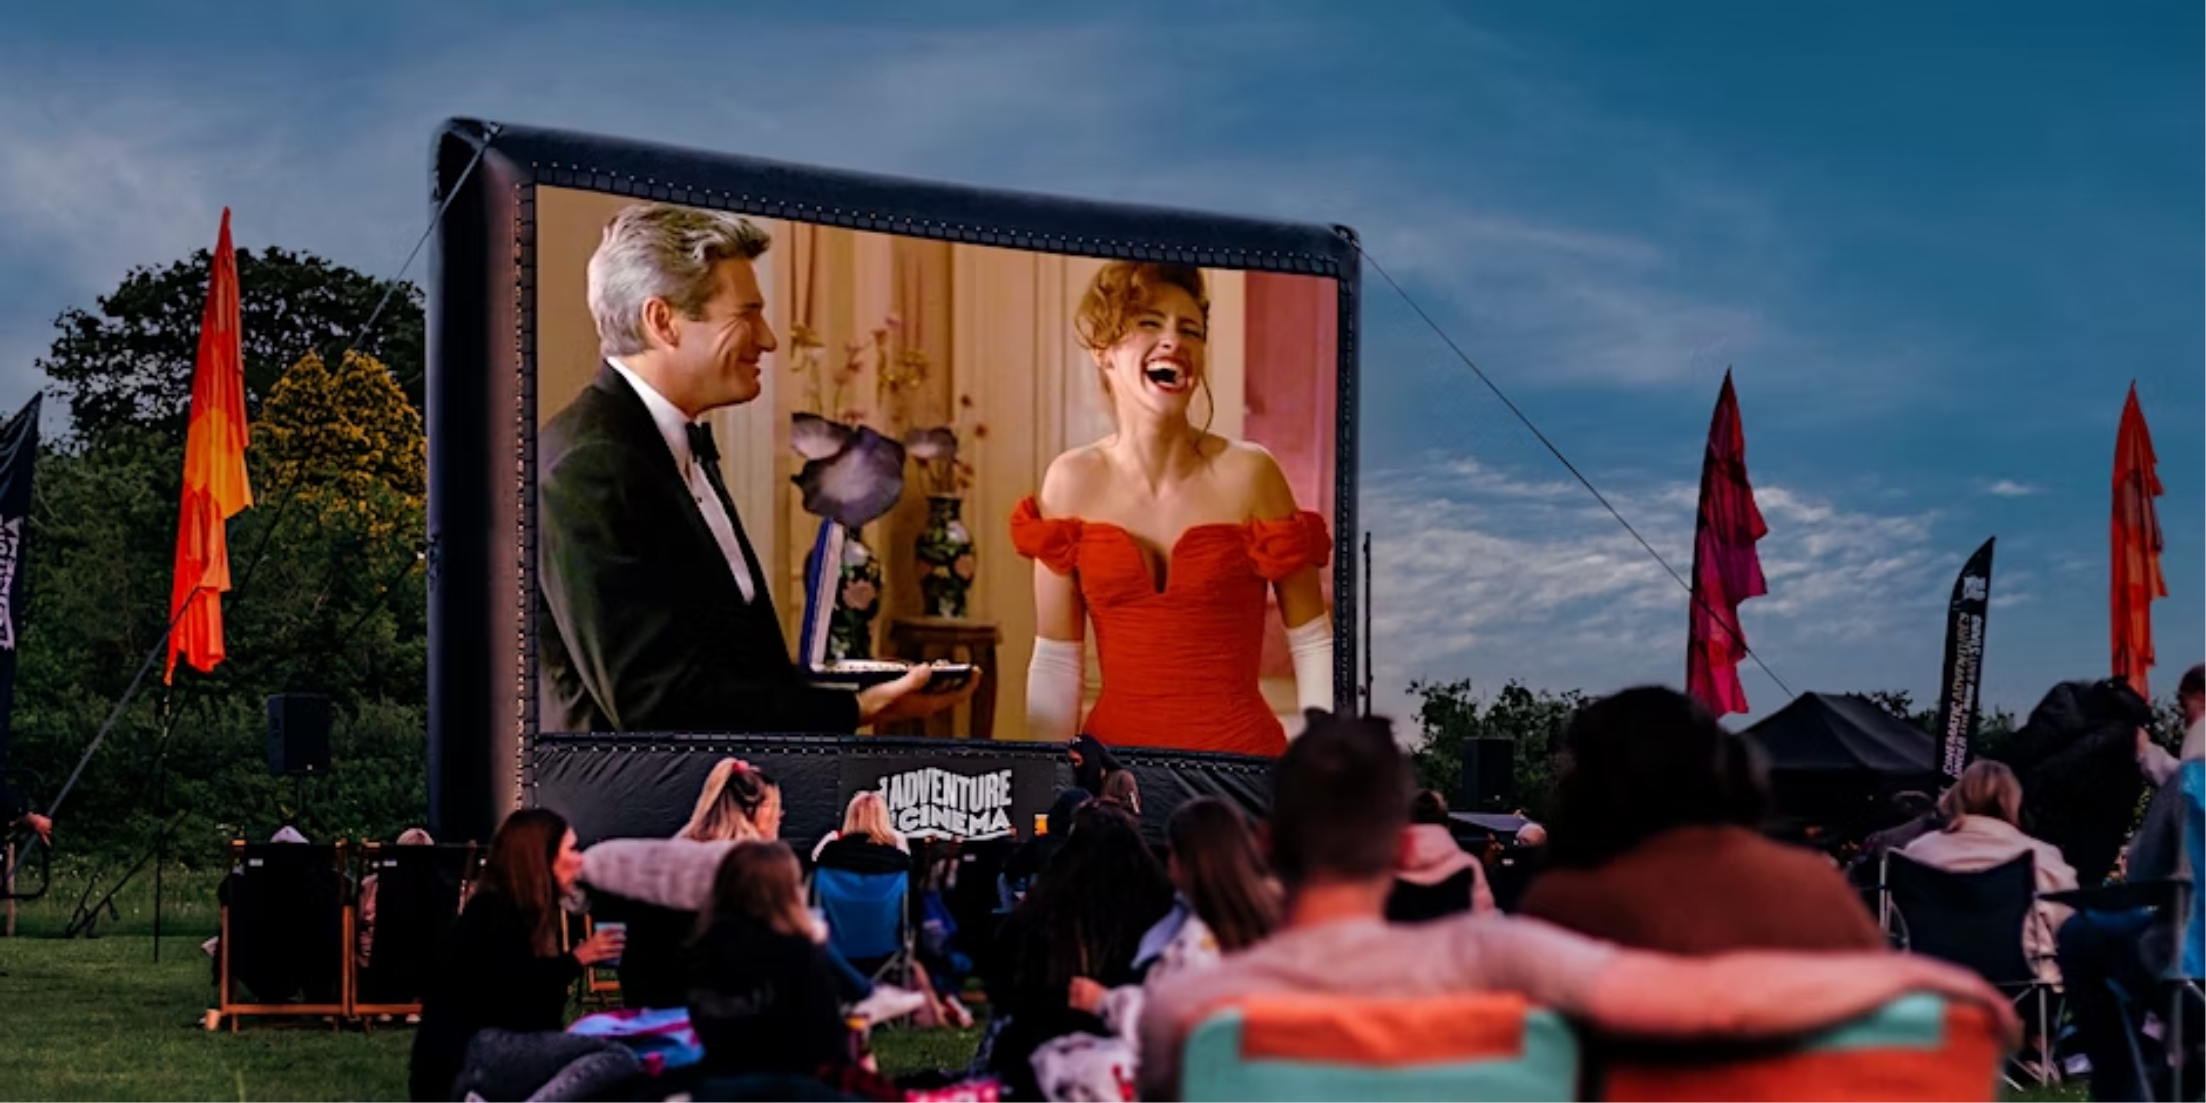 Pretty Woman Outdoor Cinema Experience at Scarborough Open Air Theatre